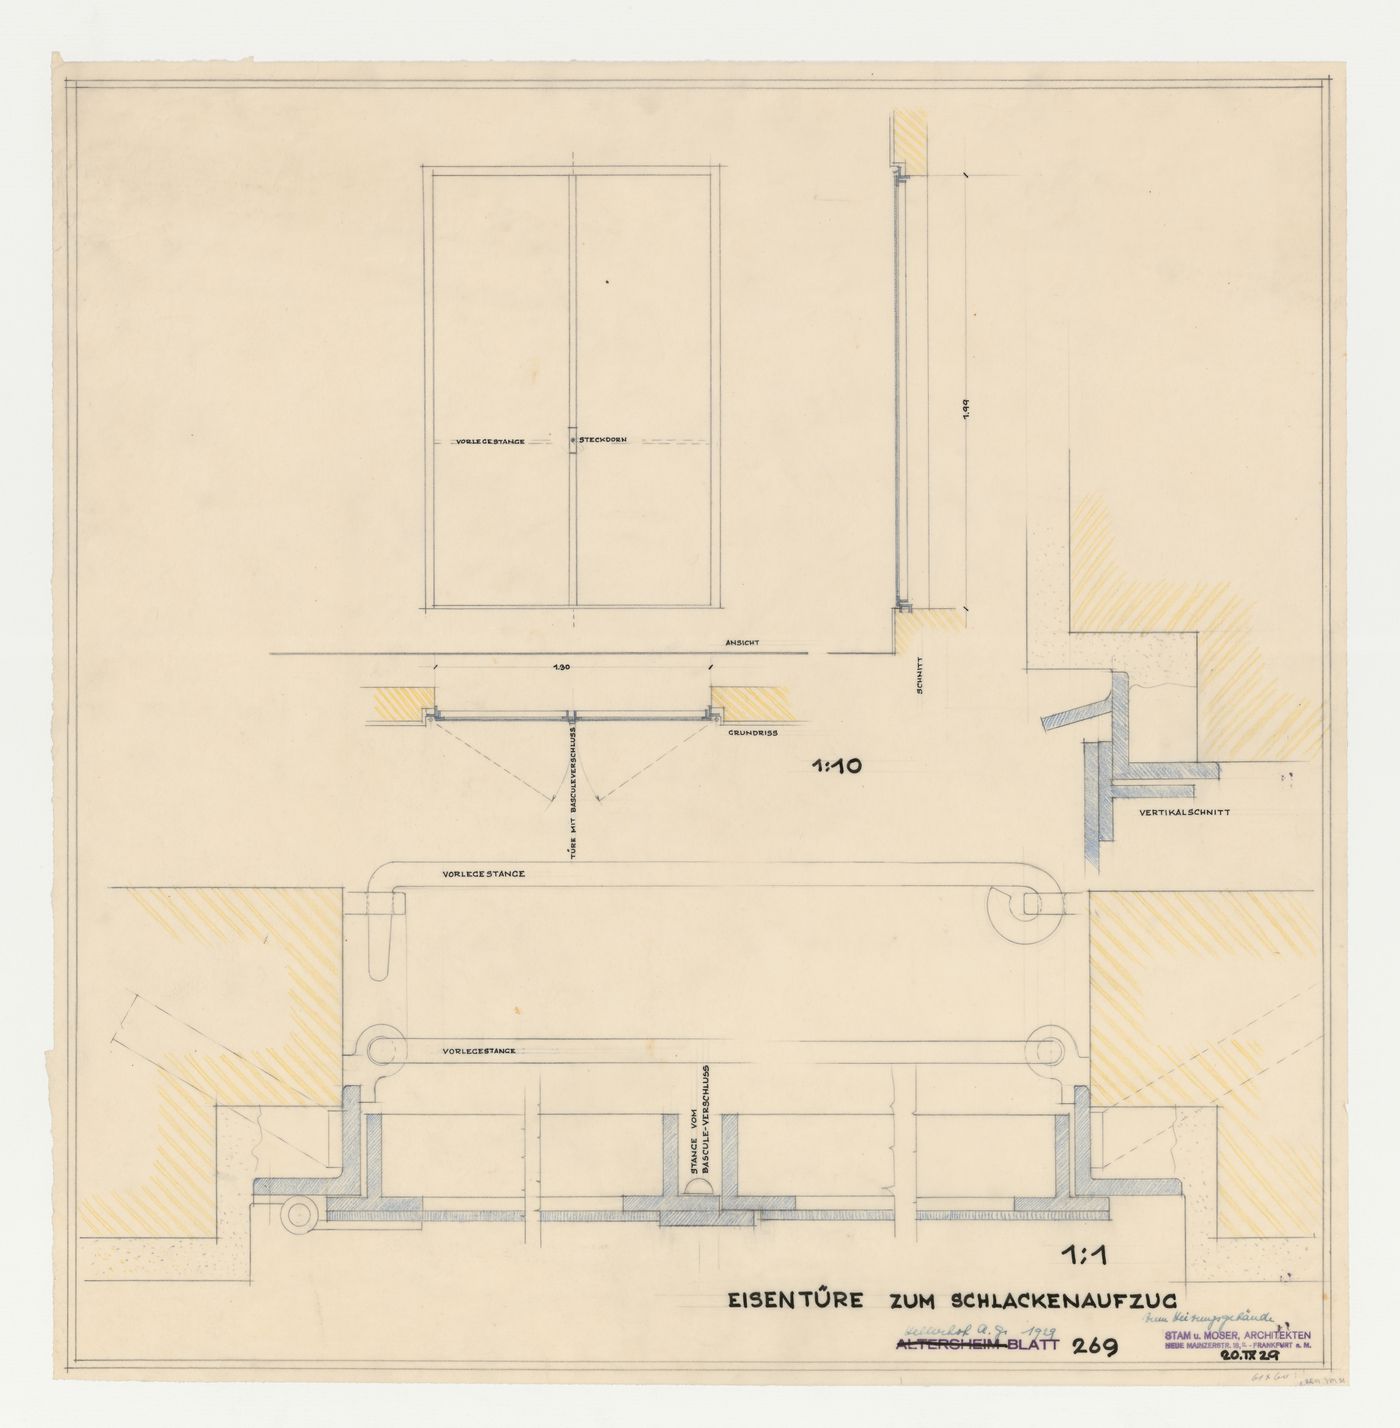 Plan, elevation, section, and sectional details for iron doors for a slag elevator for the heating systems building, Hellerhof Housing Estate, Frankfurt am Main, Germany